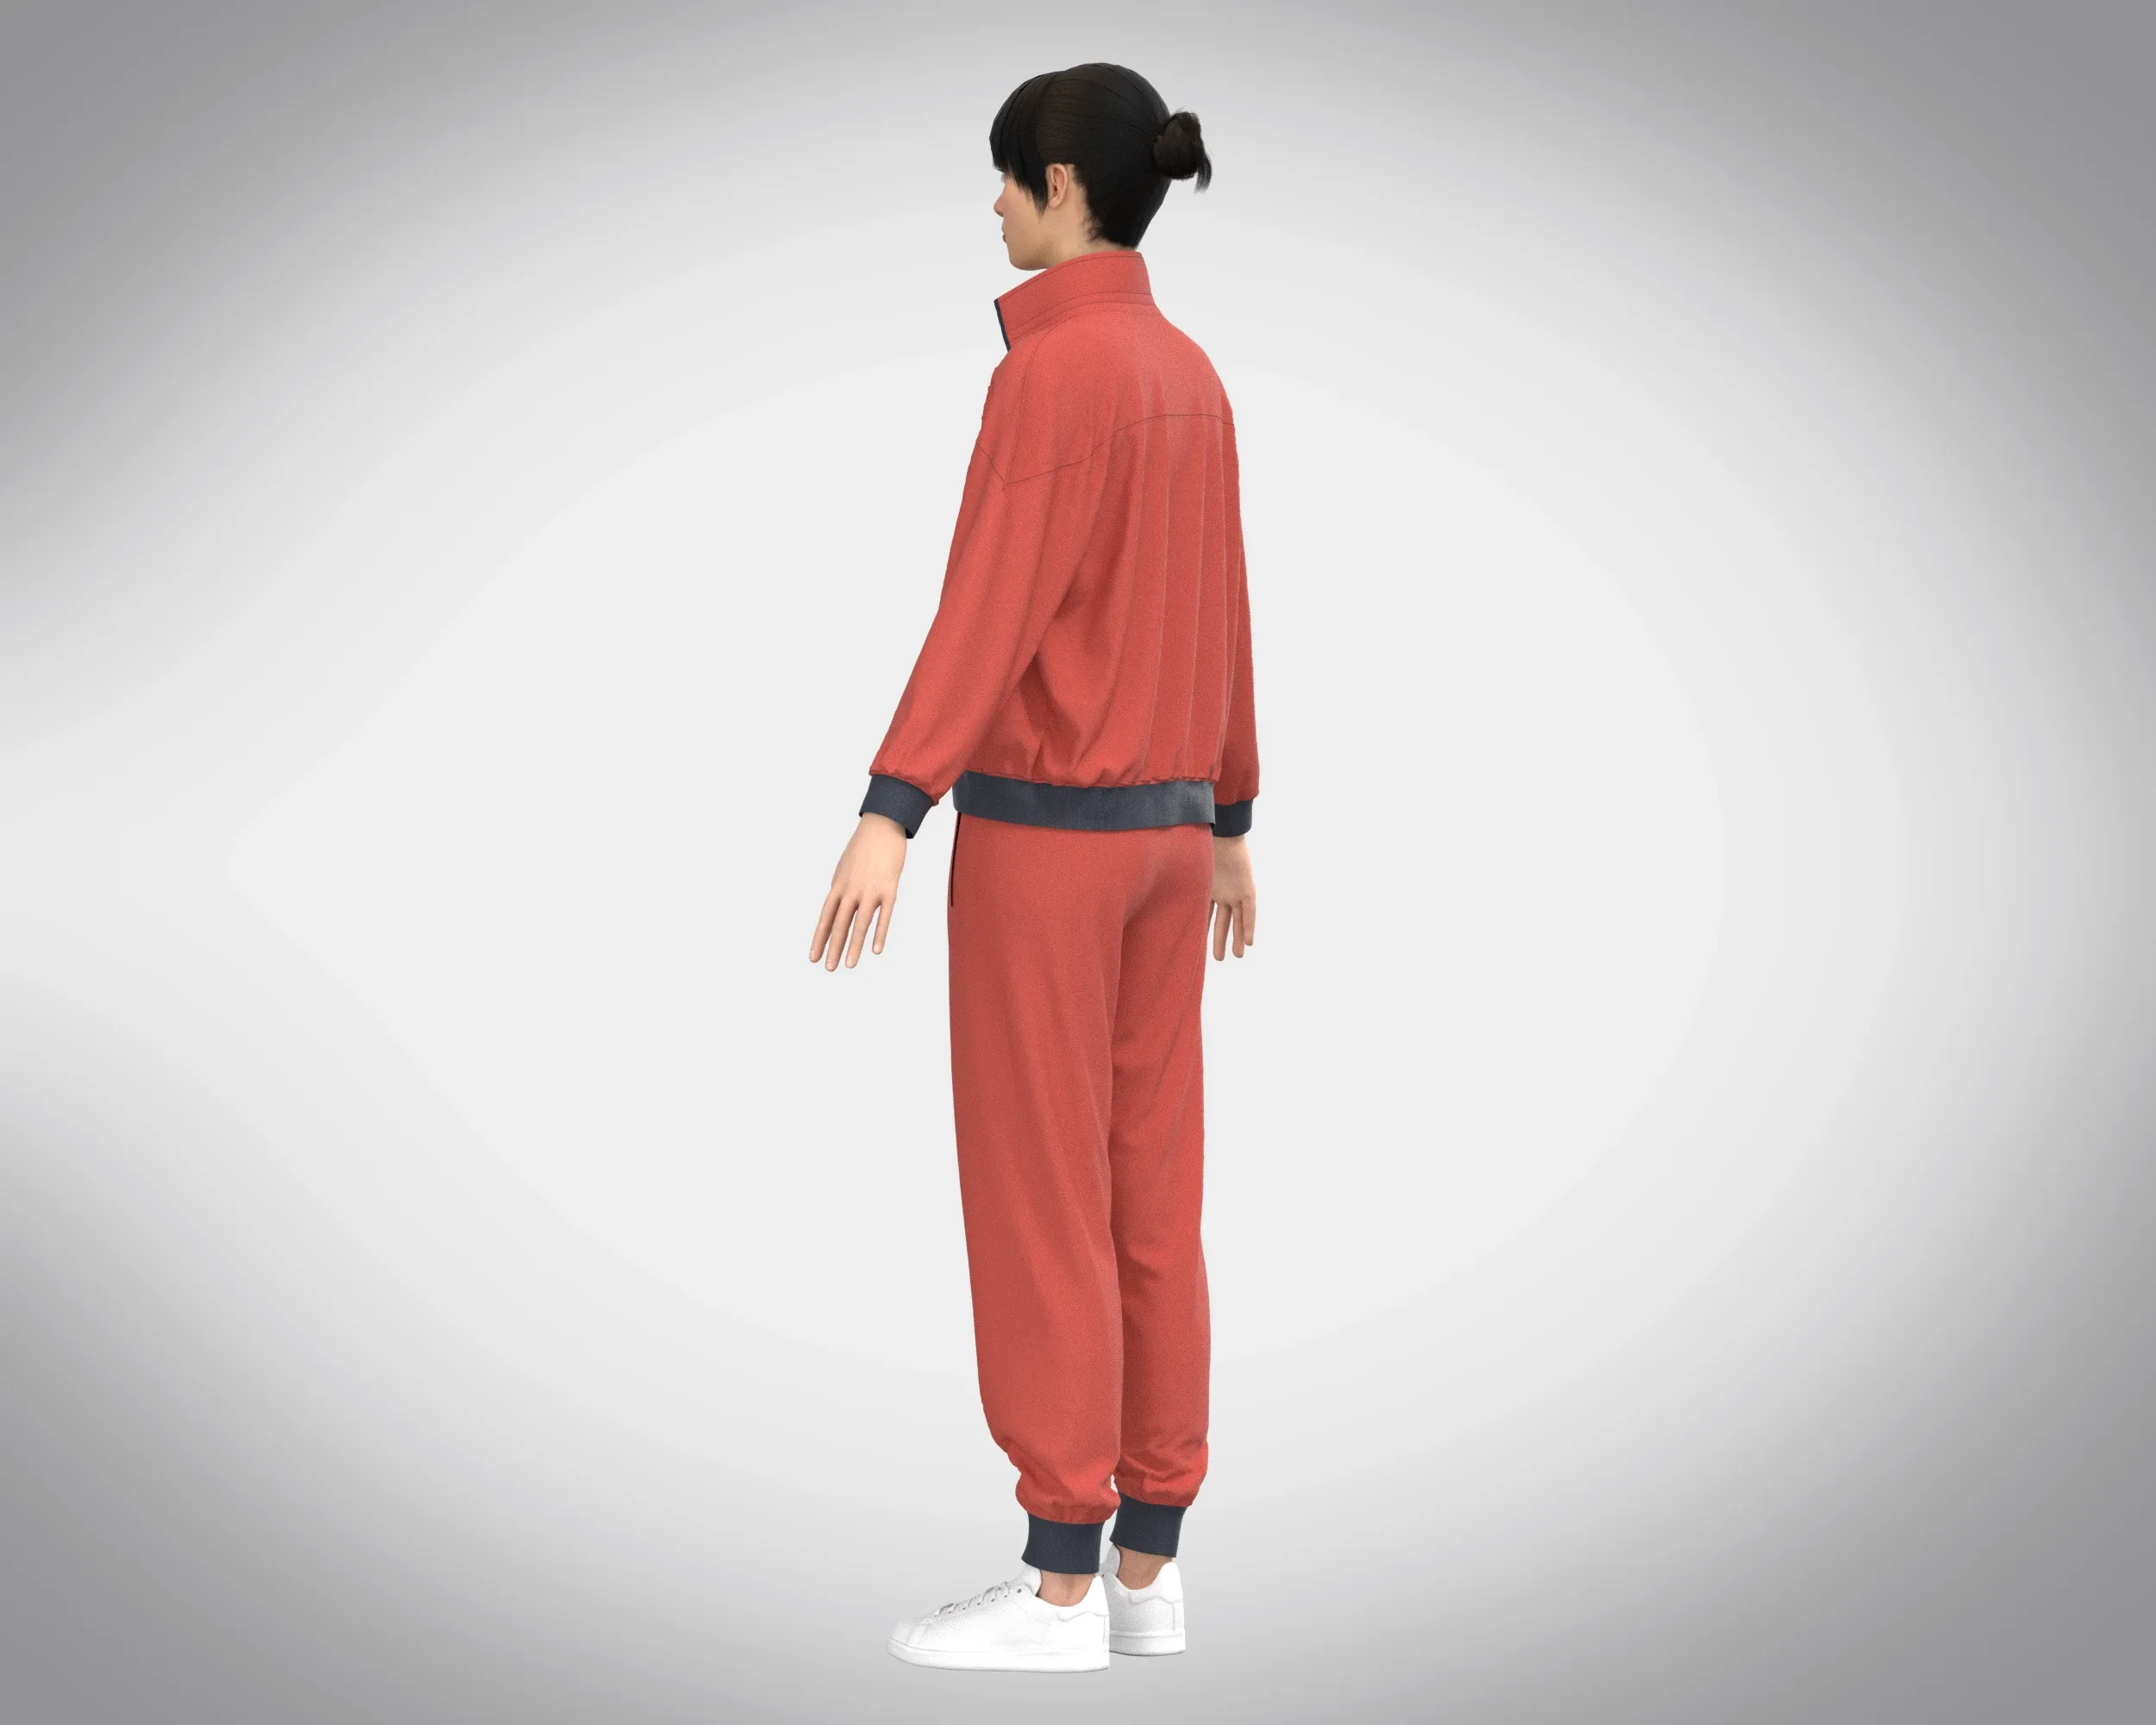 Girls Sports Outfit-Jacket with Jogger | Marvelous / Clo3d / obj / fbx